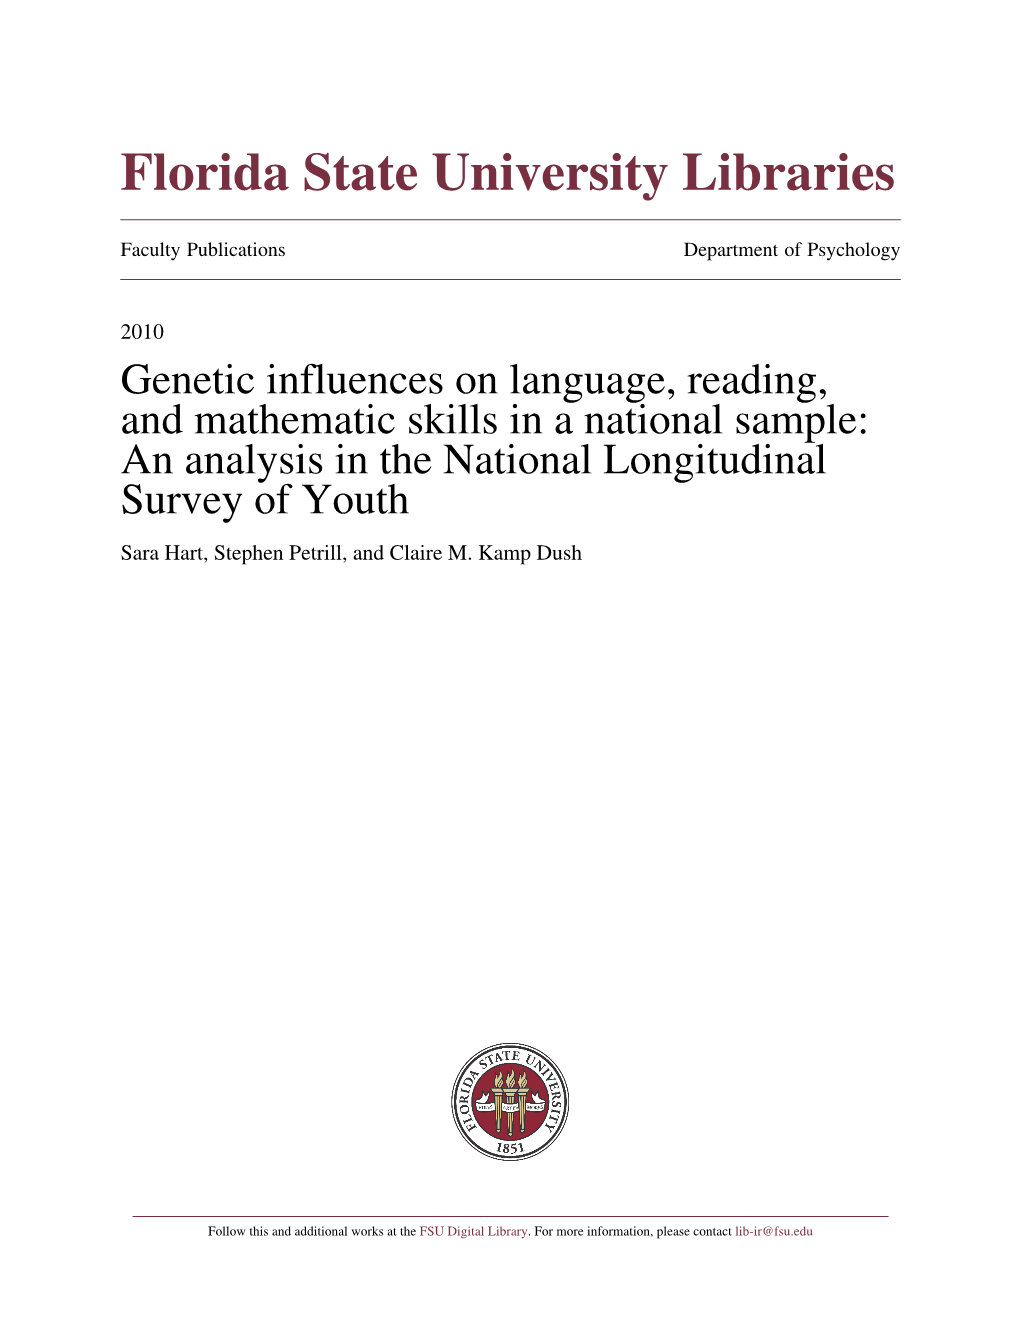 Genetic Influences on Language, Reading, and Mathematic Skills in A